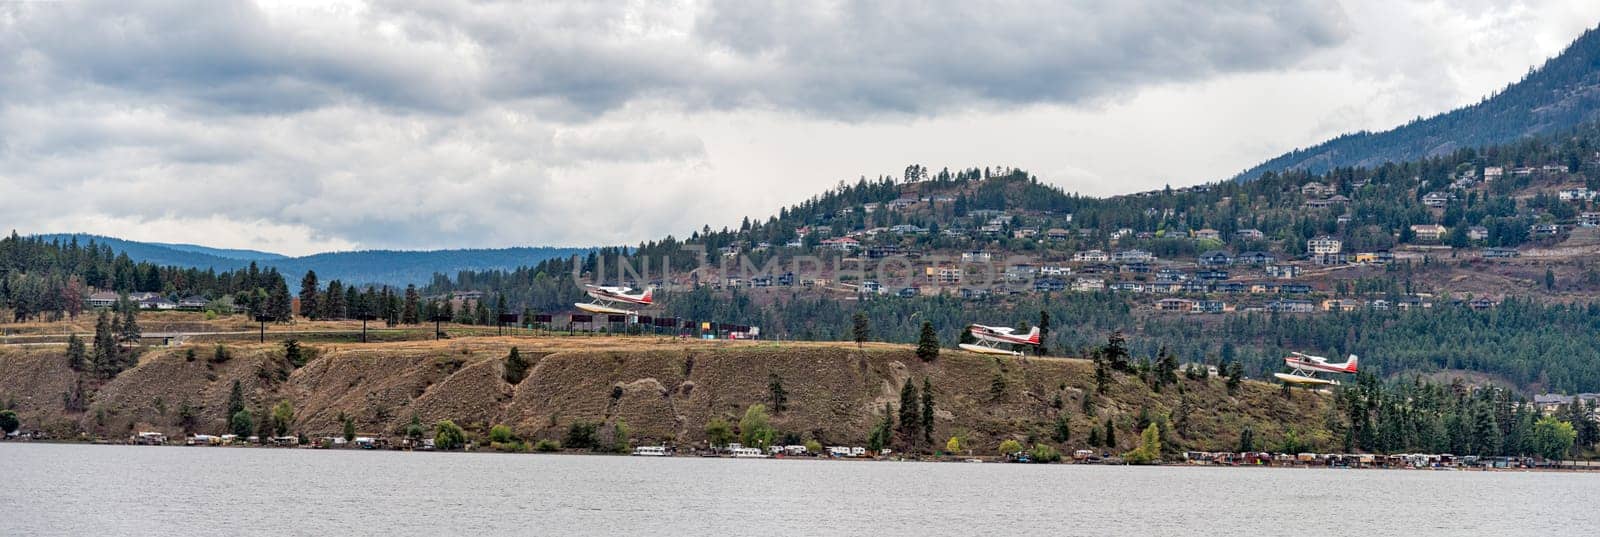 Seaplane taking off a water surface on overcast day in Okanagan valley by Imagenet